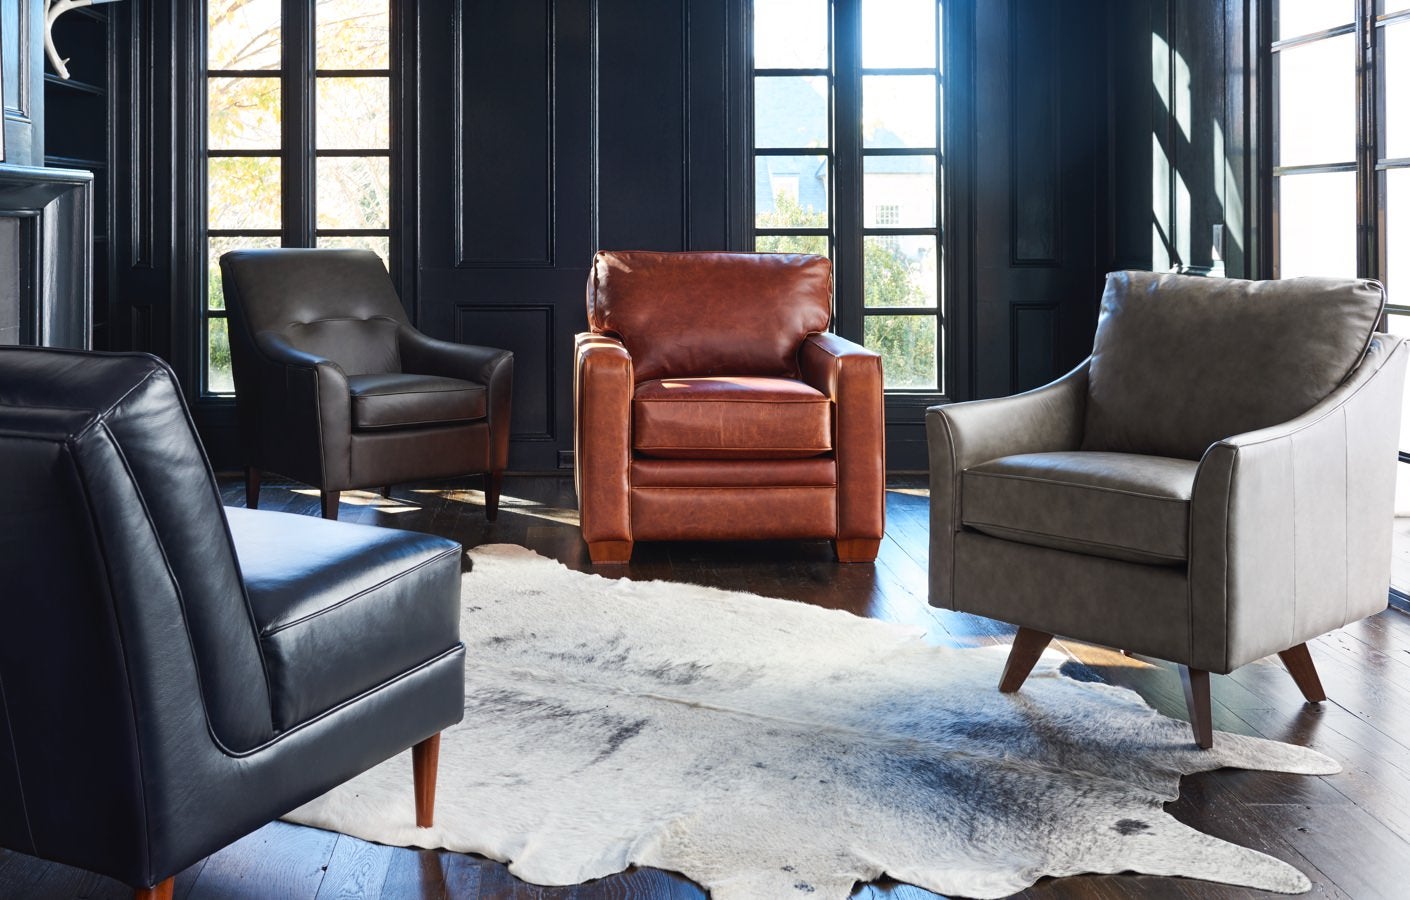 Room scene with leather chairs and rug